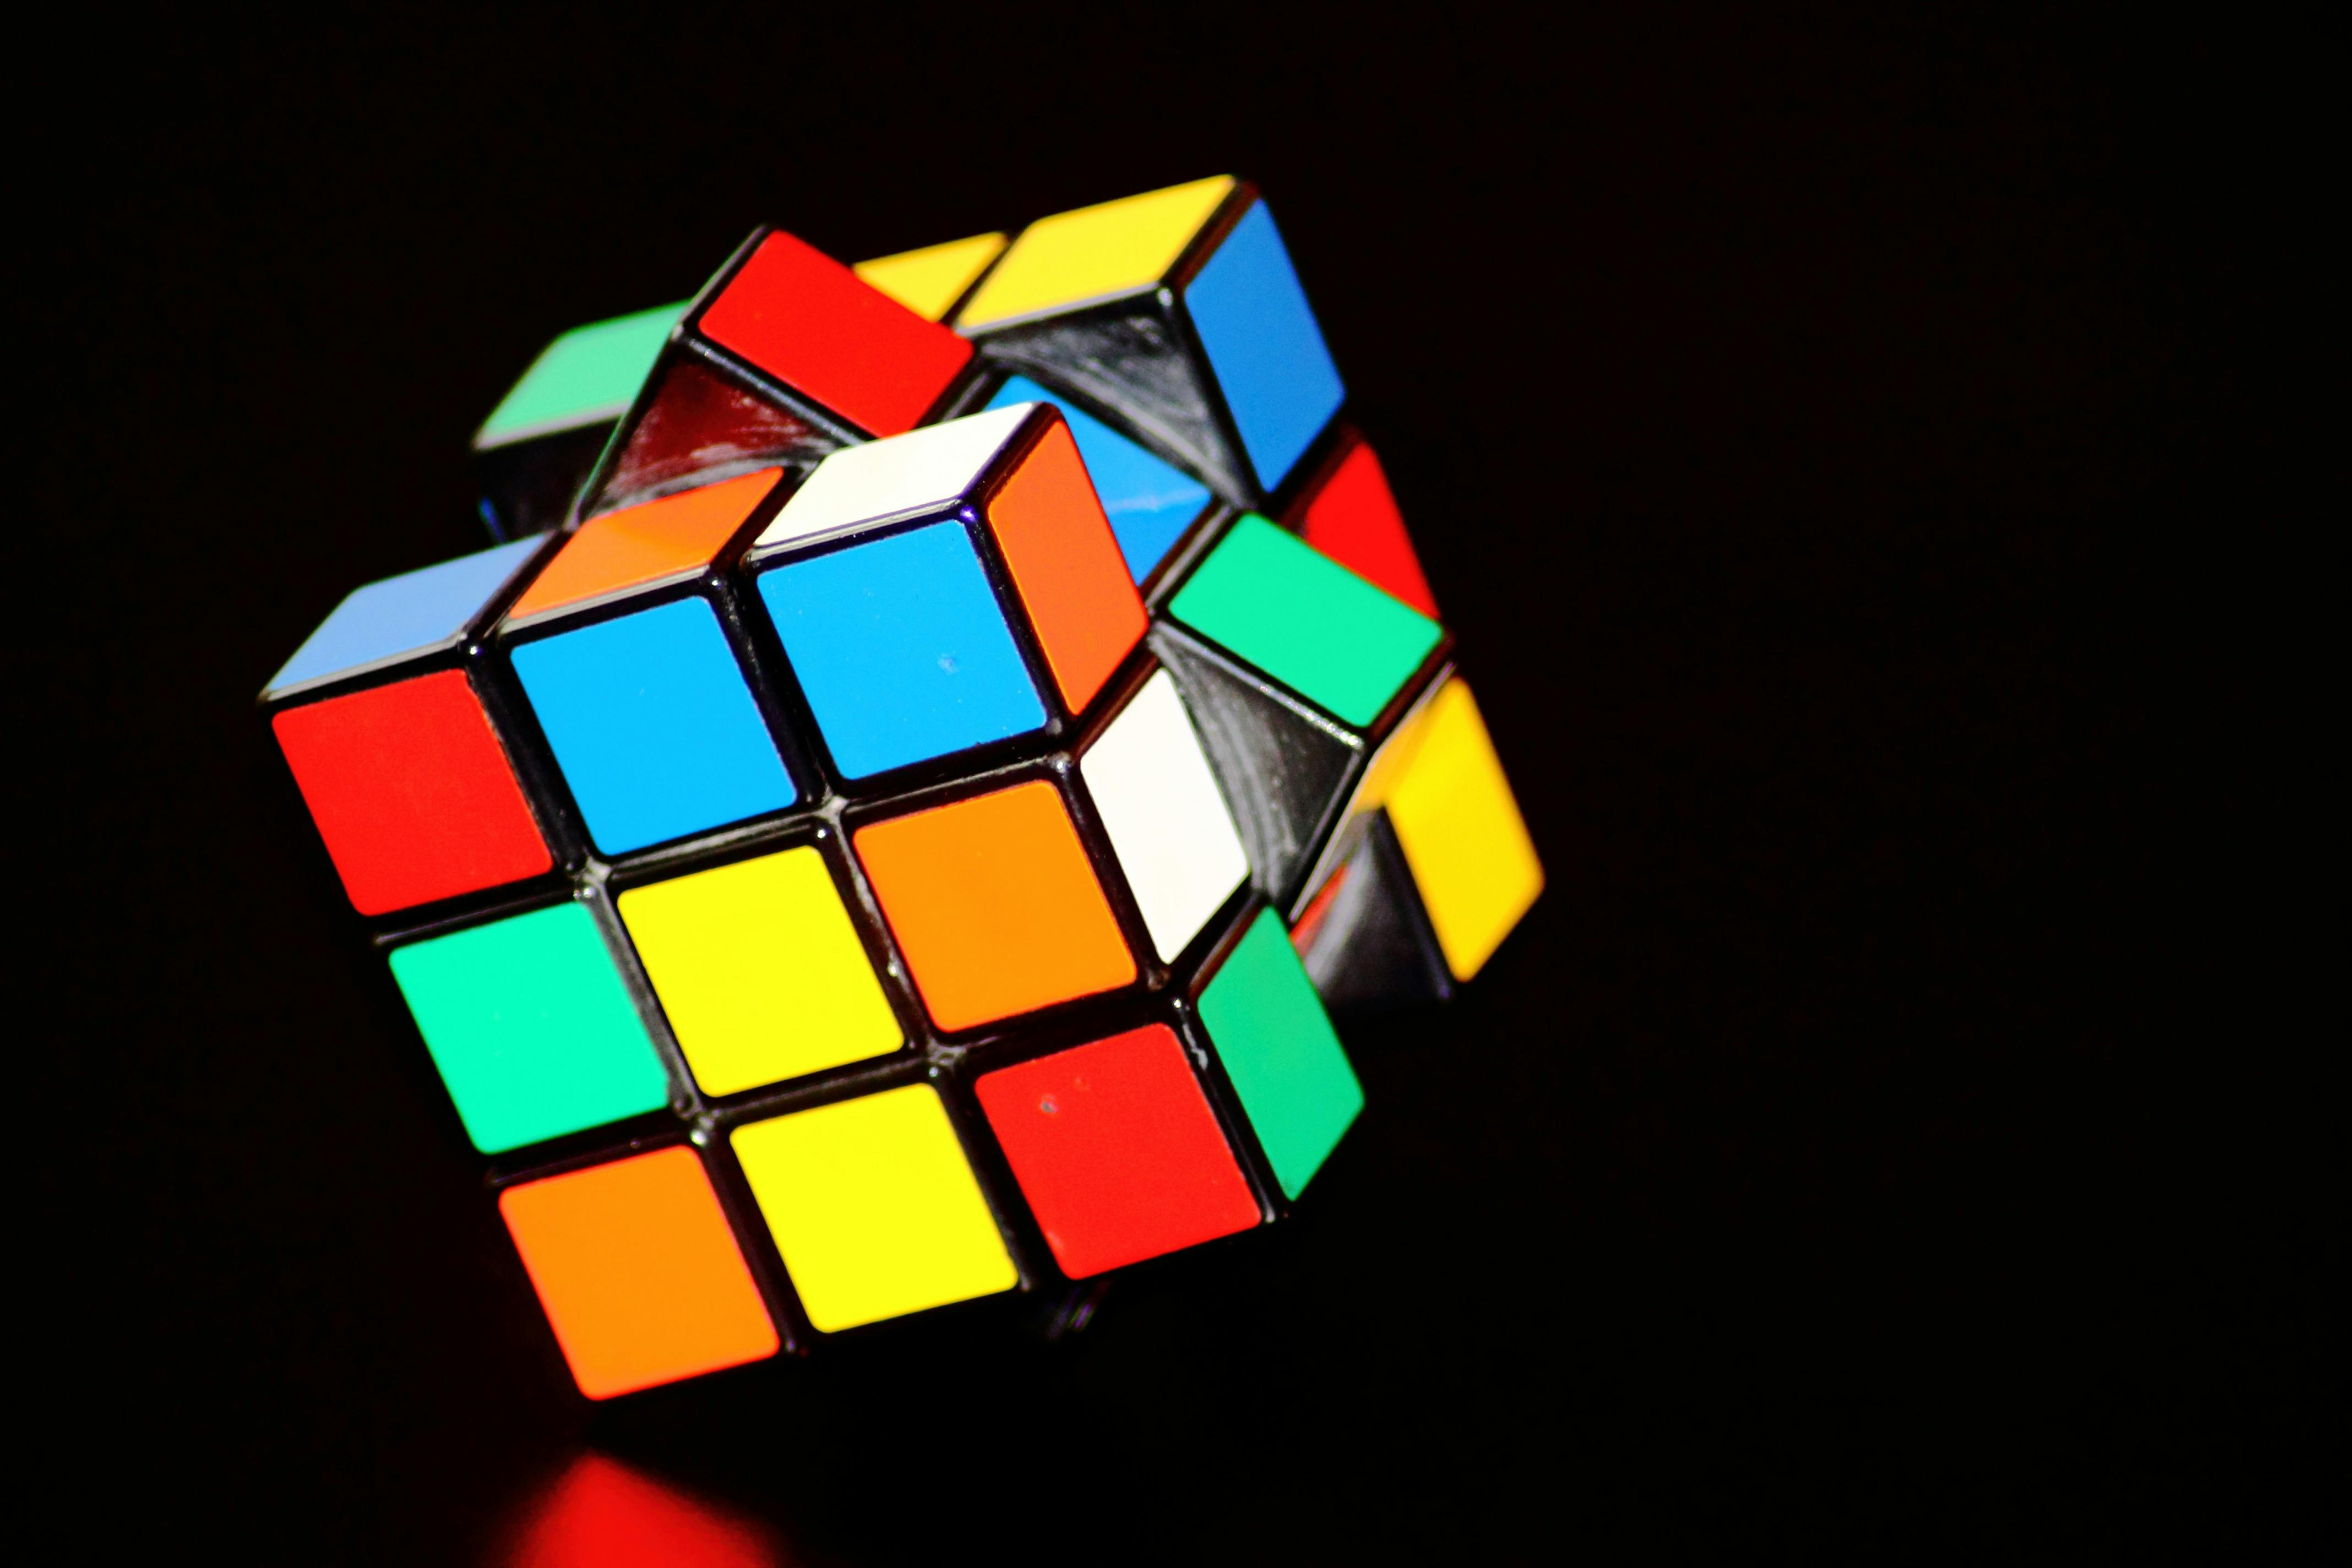 Cube Photos Download The BEST Free Cube Stock Photos  HD Images